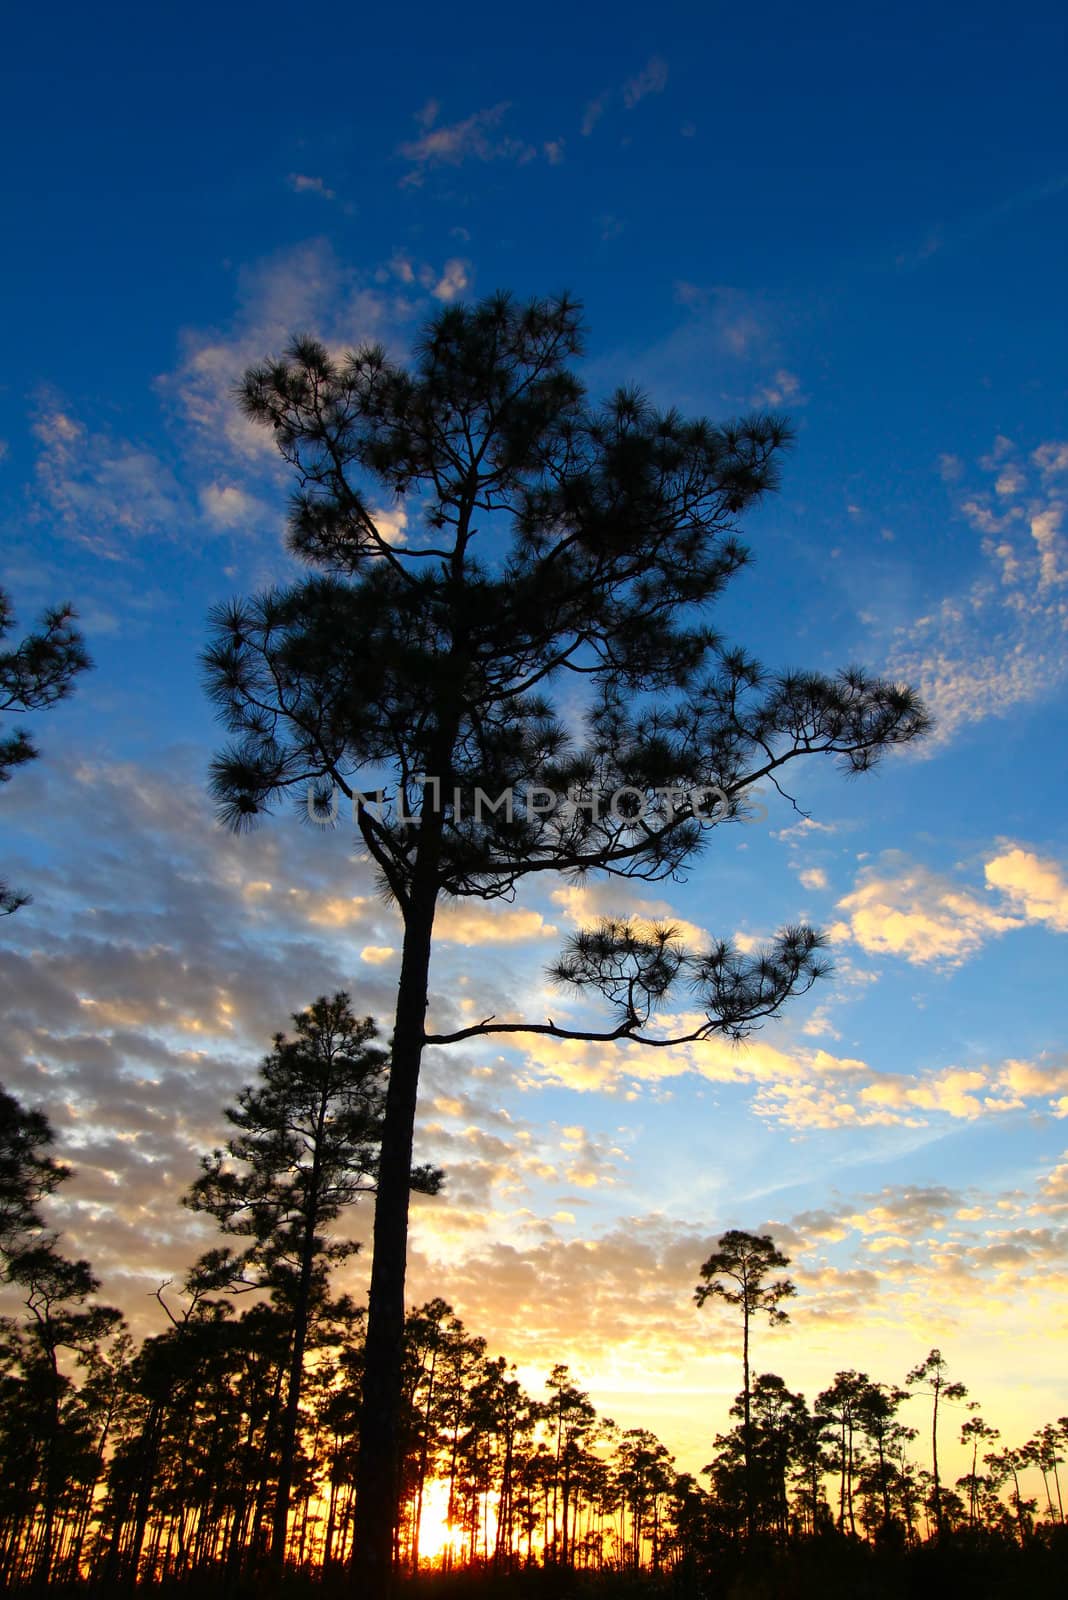 A beautiful sunset over a forest in the Everglades National Park of Florida.